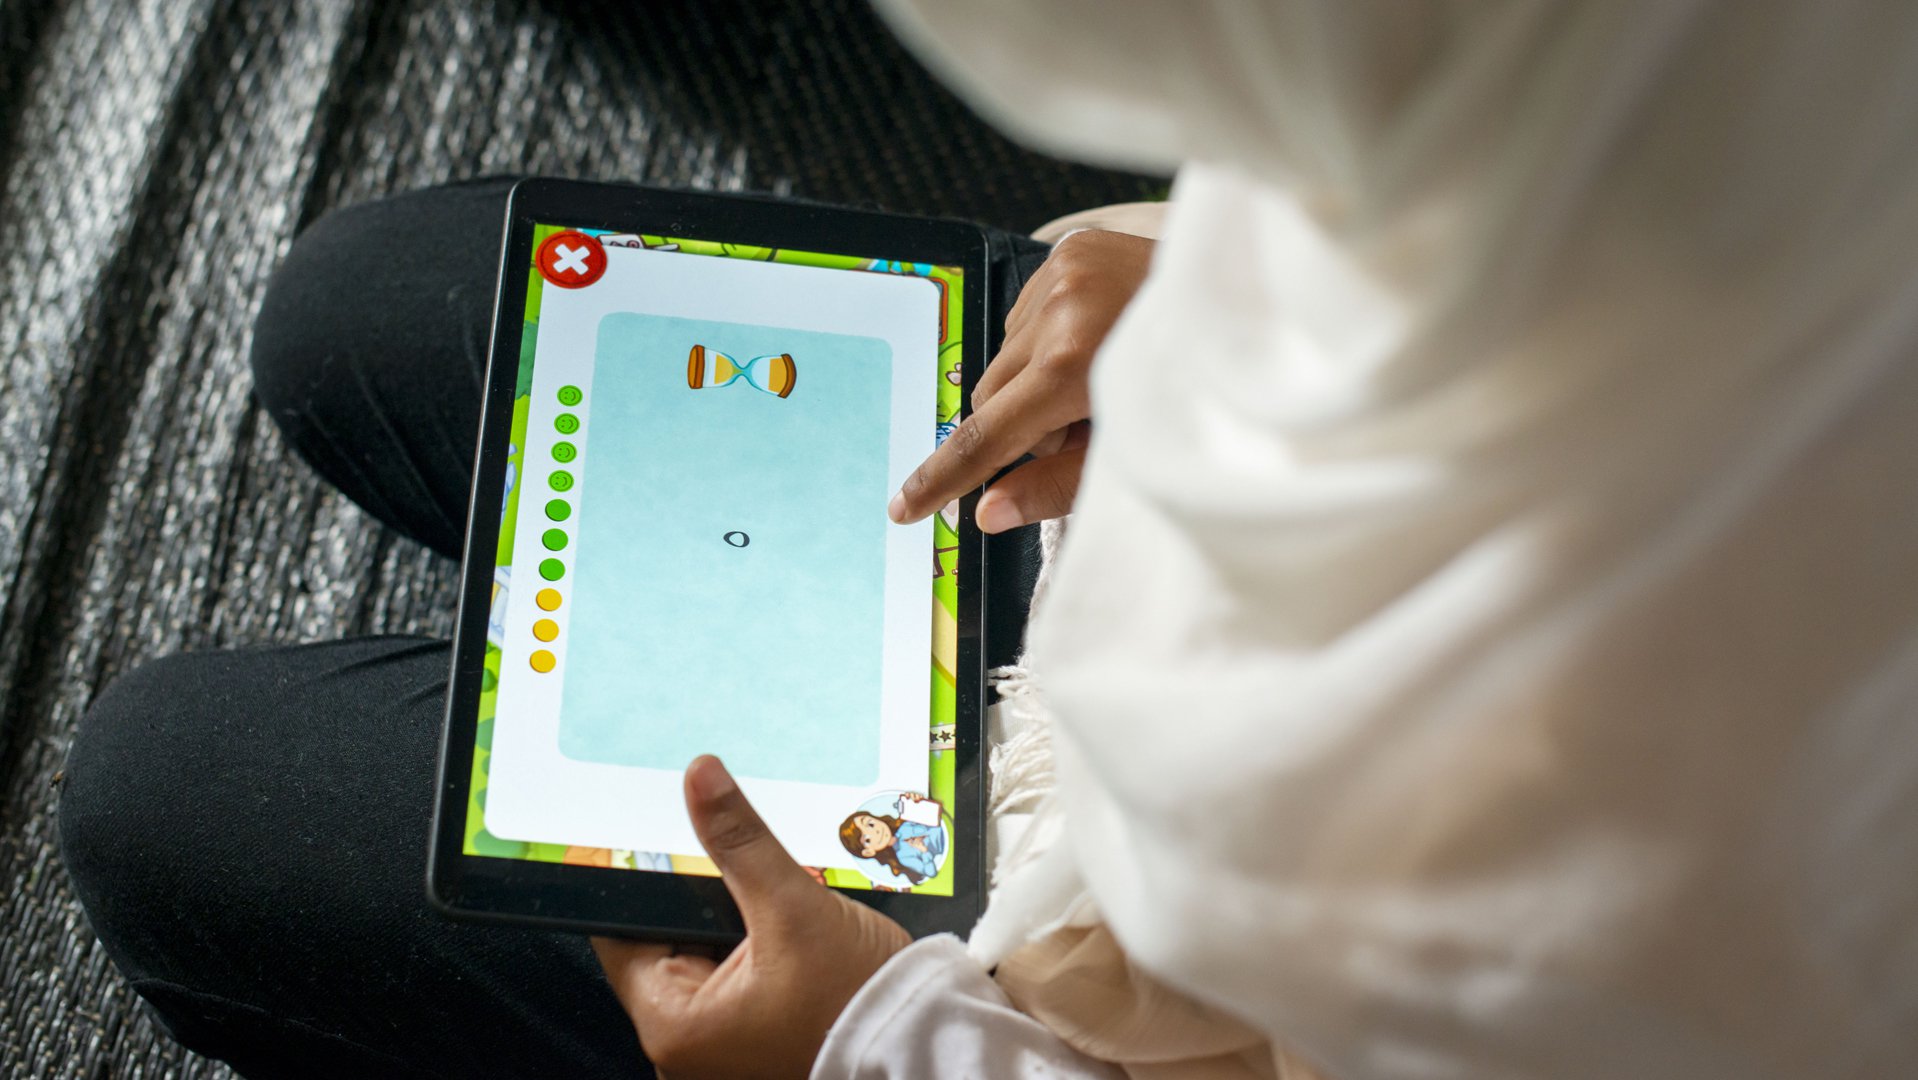 Can't Wait to Learn provides tablet education to continue learning remotely where schools are not accessible War Child